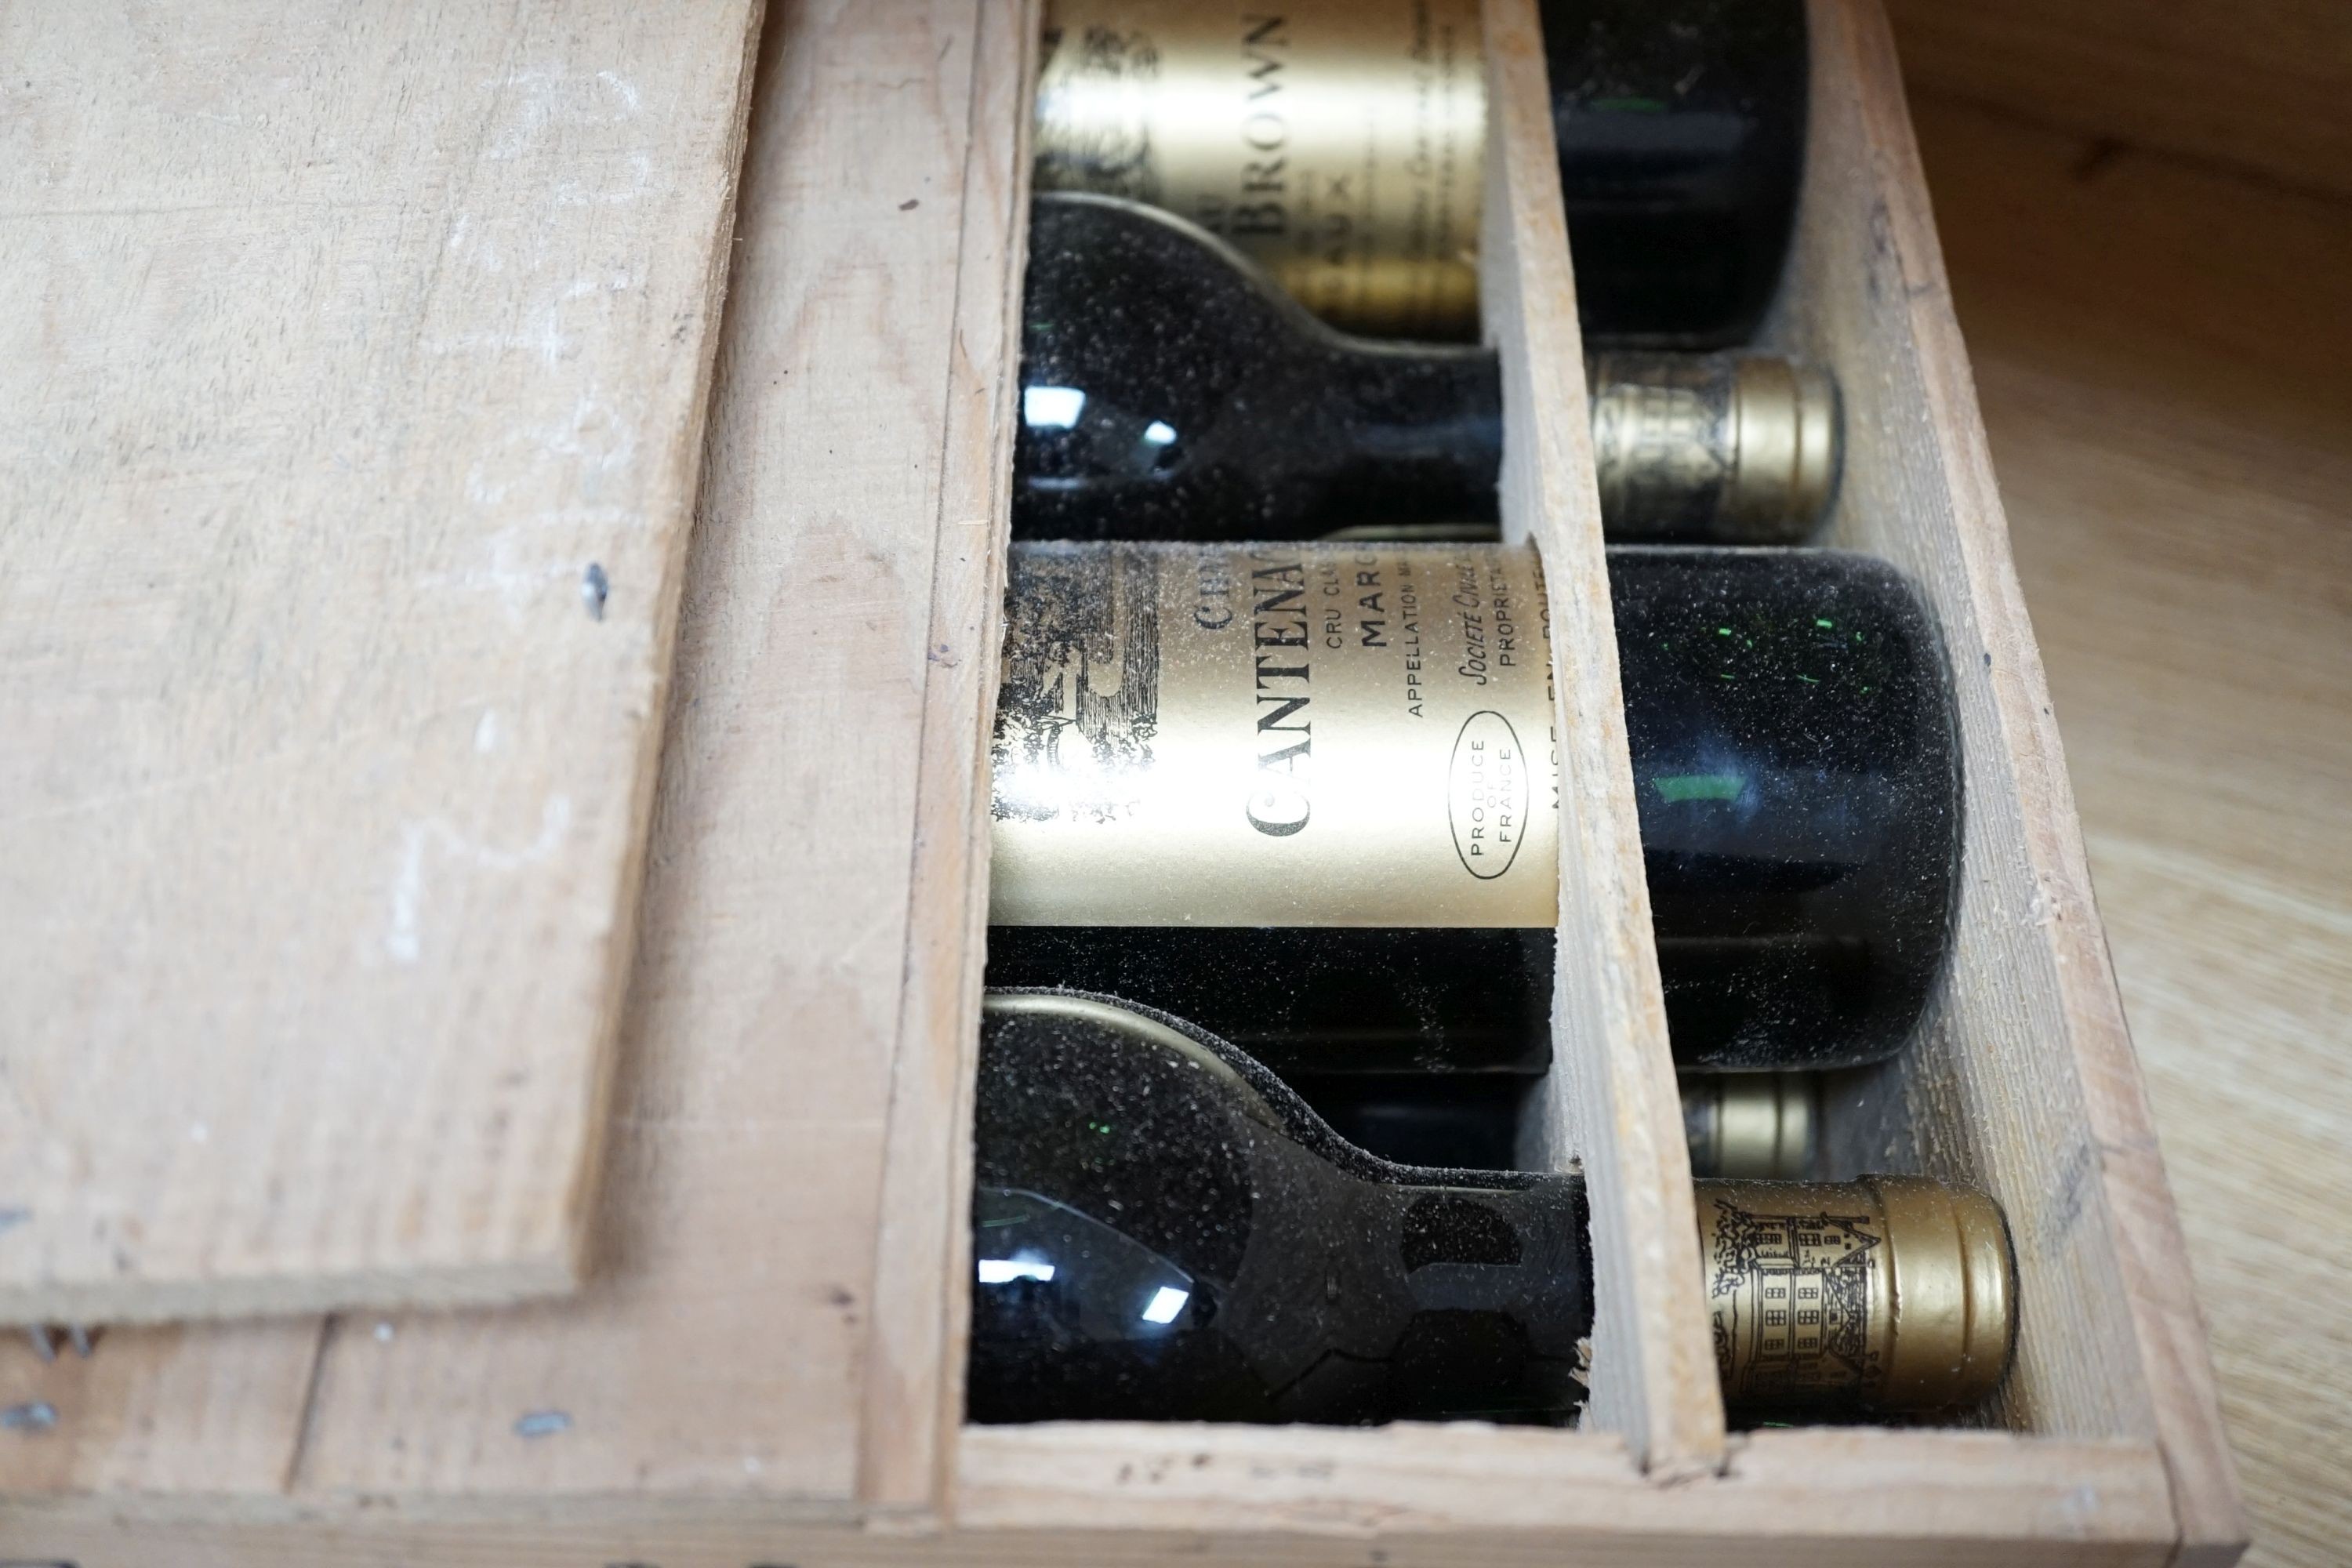 A case of 12 bottles of Chateau Cantenac-Brown, Margaux, 1975 in OWC..